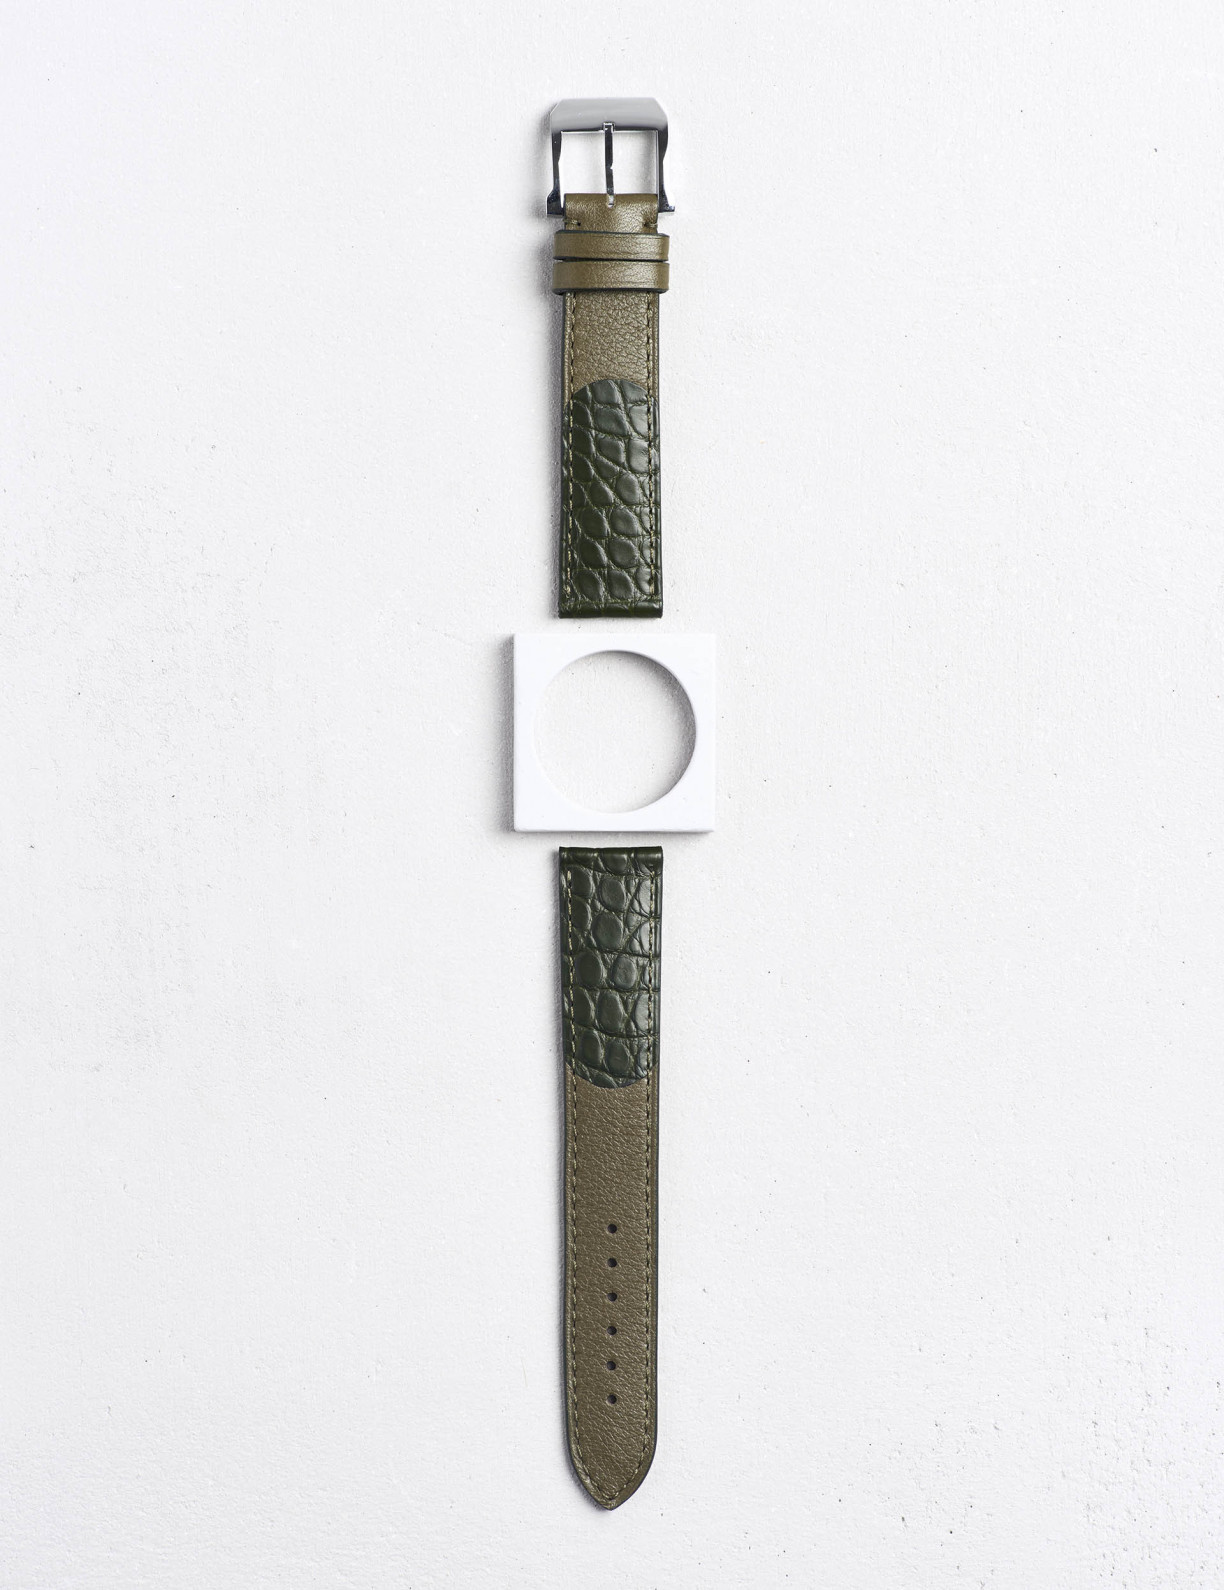 37.01 Duo watch strap in smooth calfskin and alligator